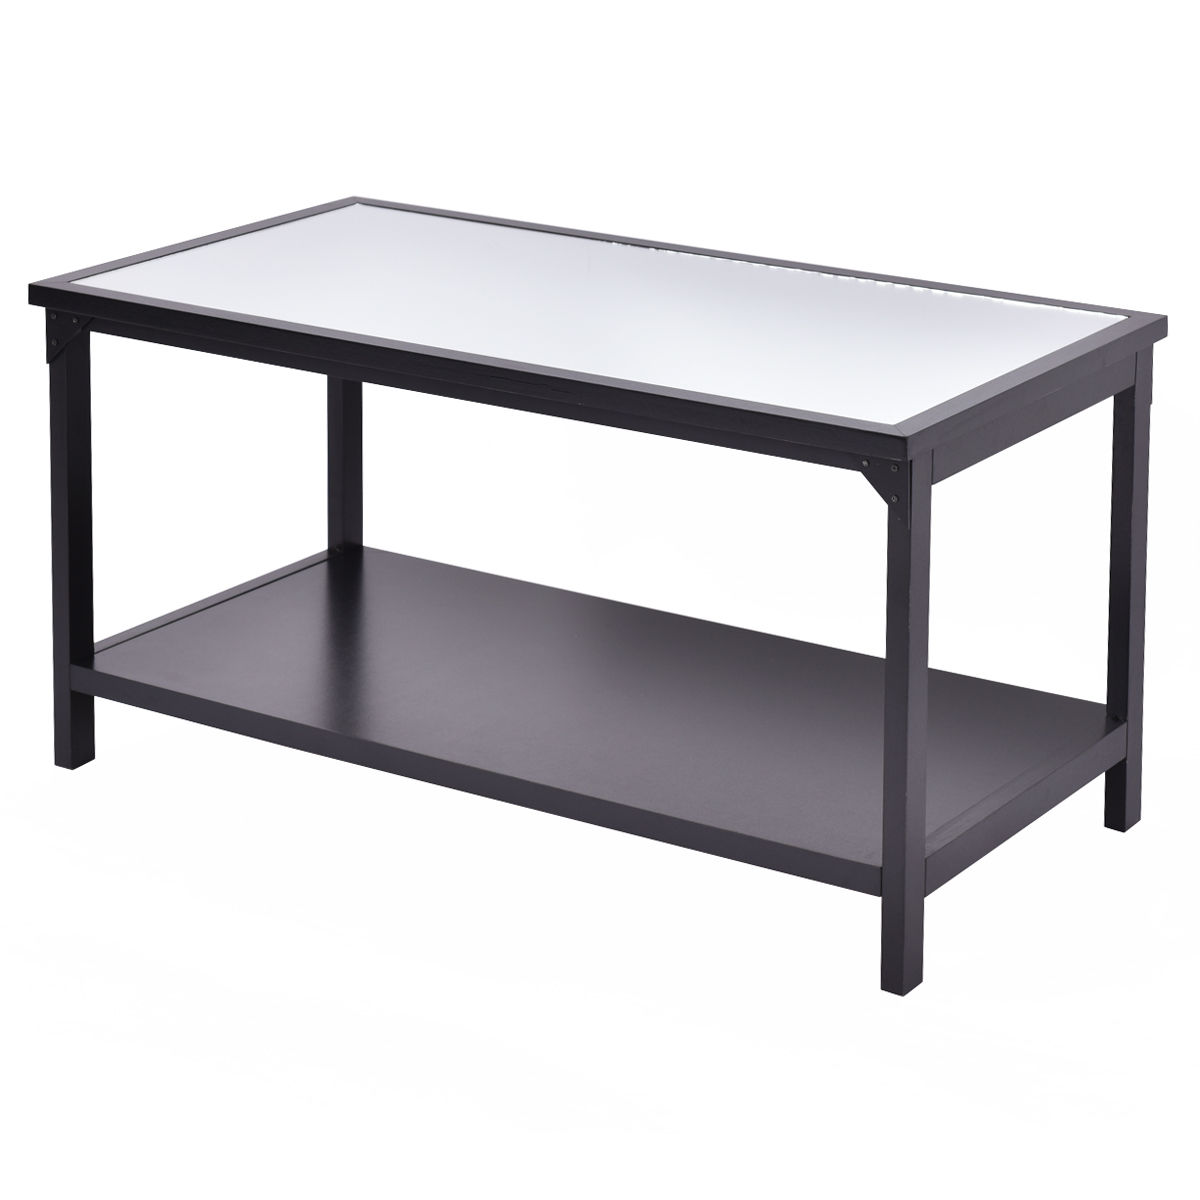 excellent glass accent tables living room bench ott modern avenue storage metal table furniture chrome target hawthorne threshold cabinet top and outdoor small kijiji gold console